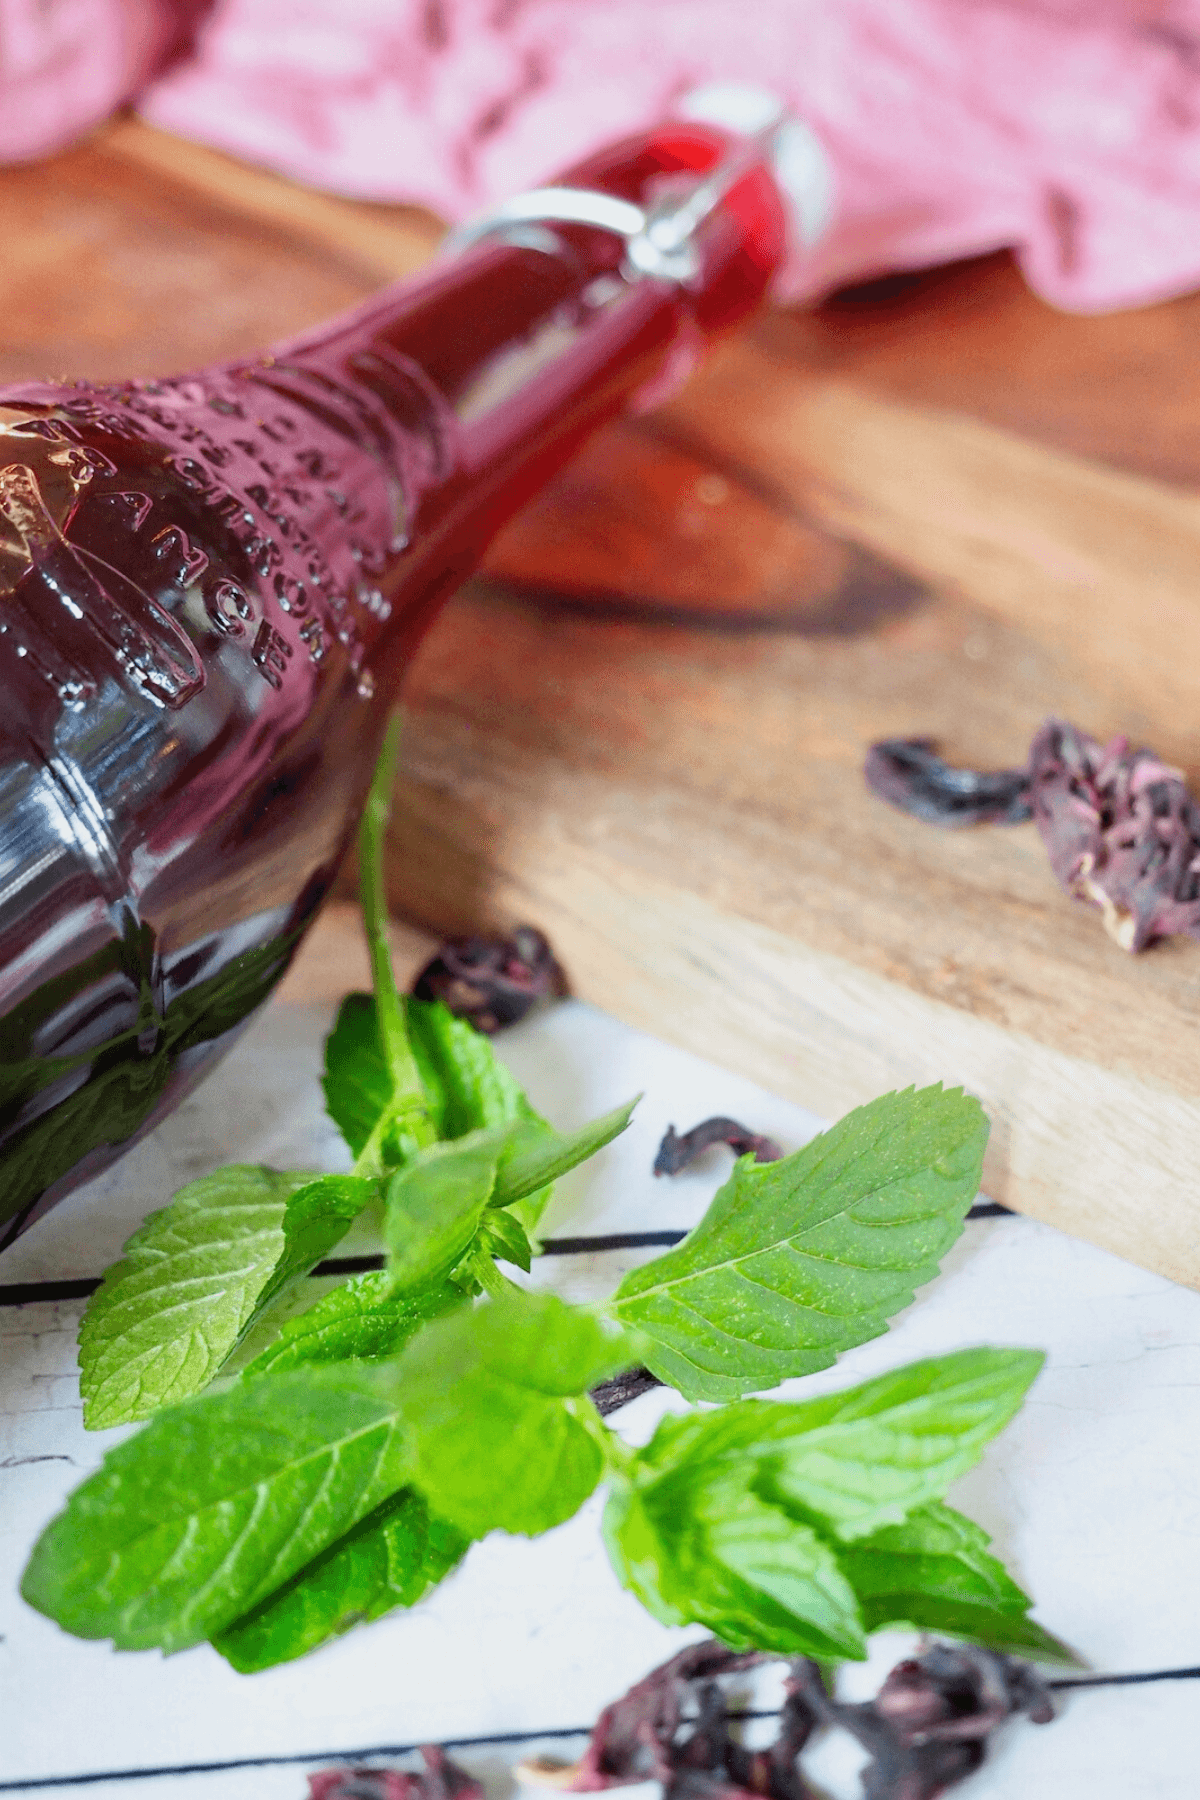 Full bottle of passion tea concentrate with fresh mint and dried hibiscus flowers nearby. 